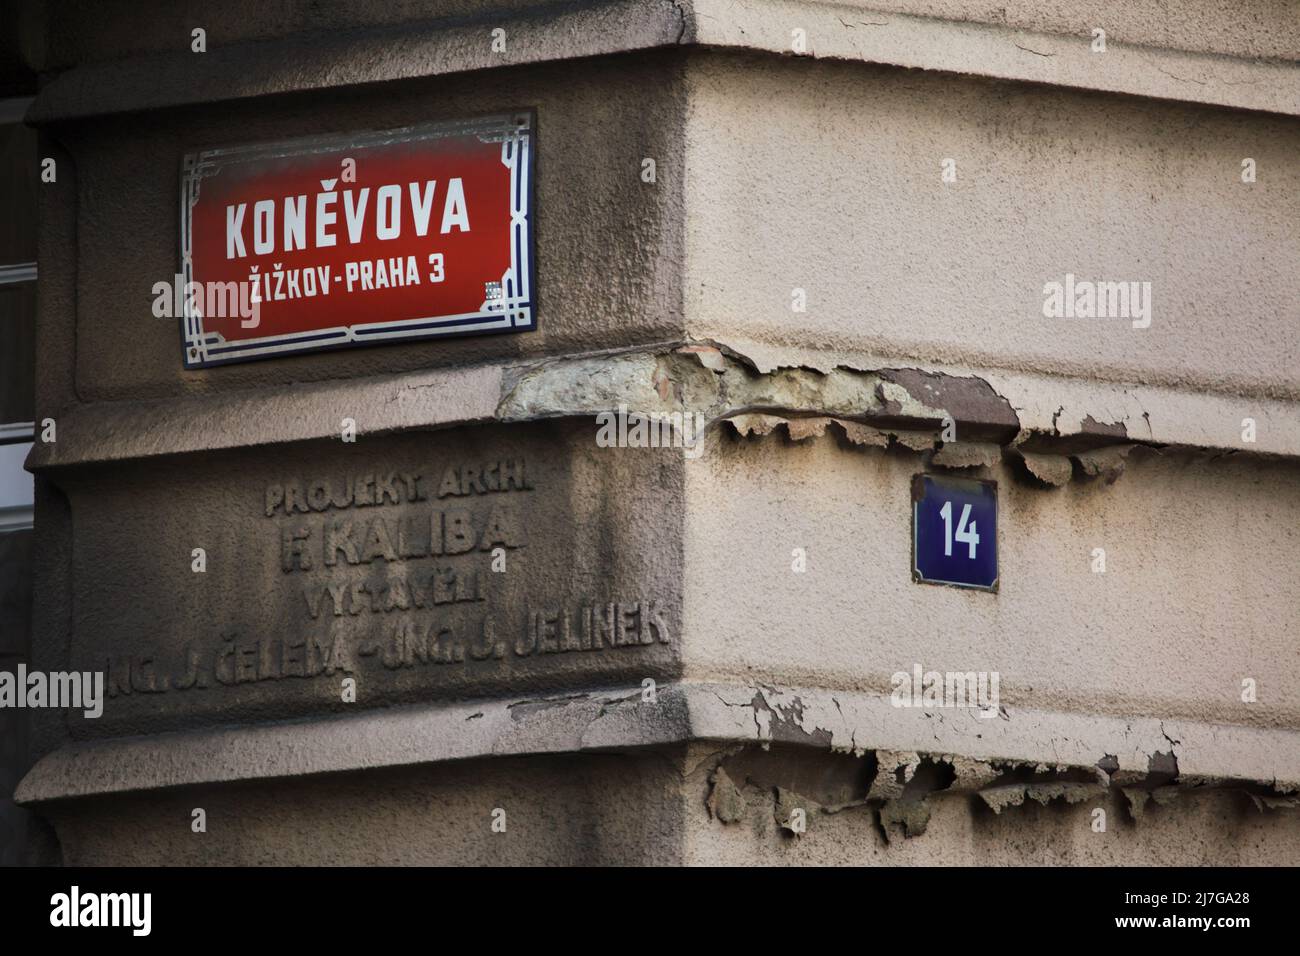 Koněvova Street. Traditional red street sign in Žižkov district in Prague, Czech Republic. The street is named after Soviet military commander Ivan Konev (also spelled Ivan Koněv) who was a commander of the 1st Ukrainian Front of the Red Army which attended the liberation of Prague during the last days of World War II. Stock Photo